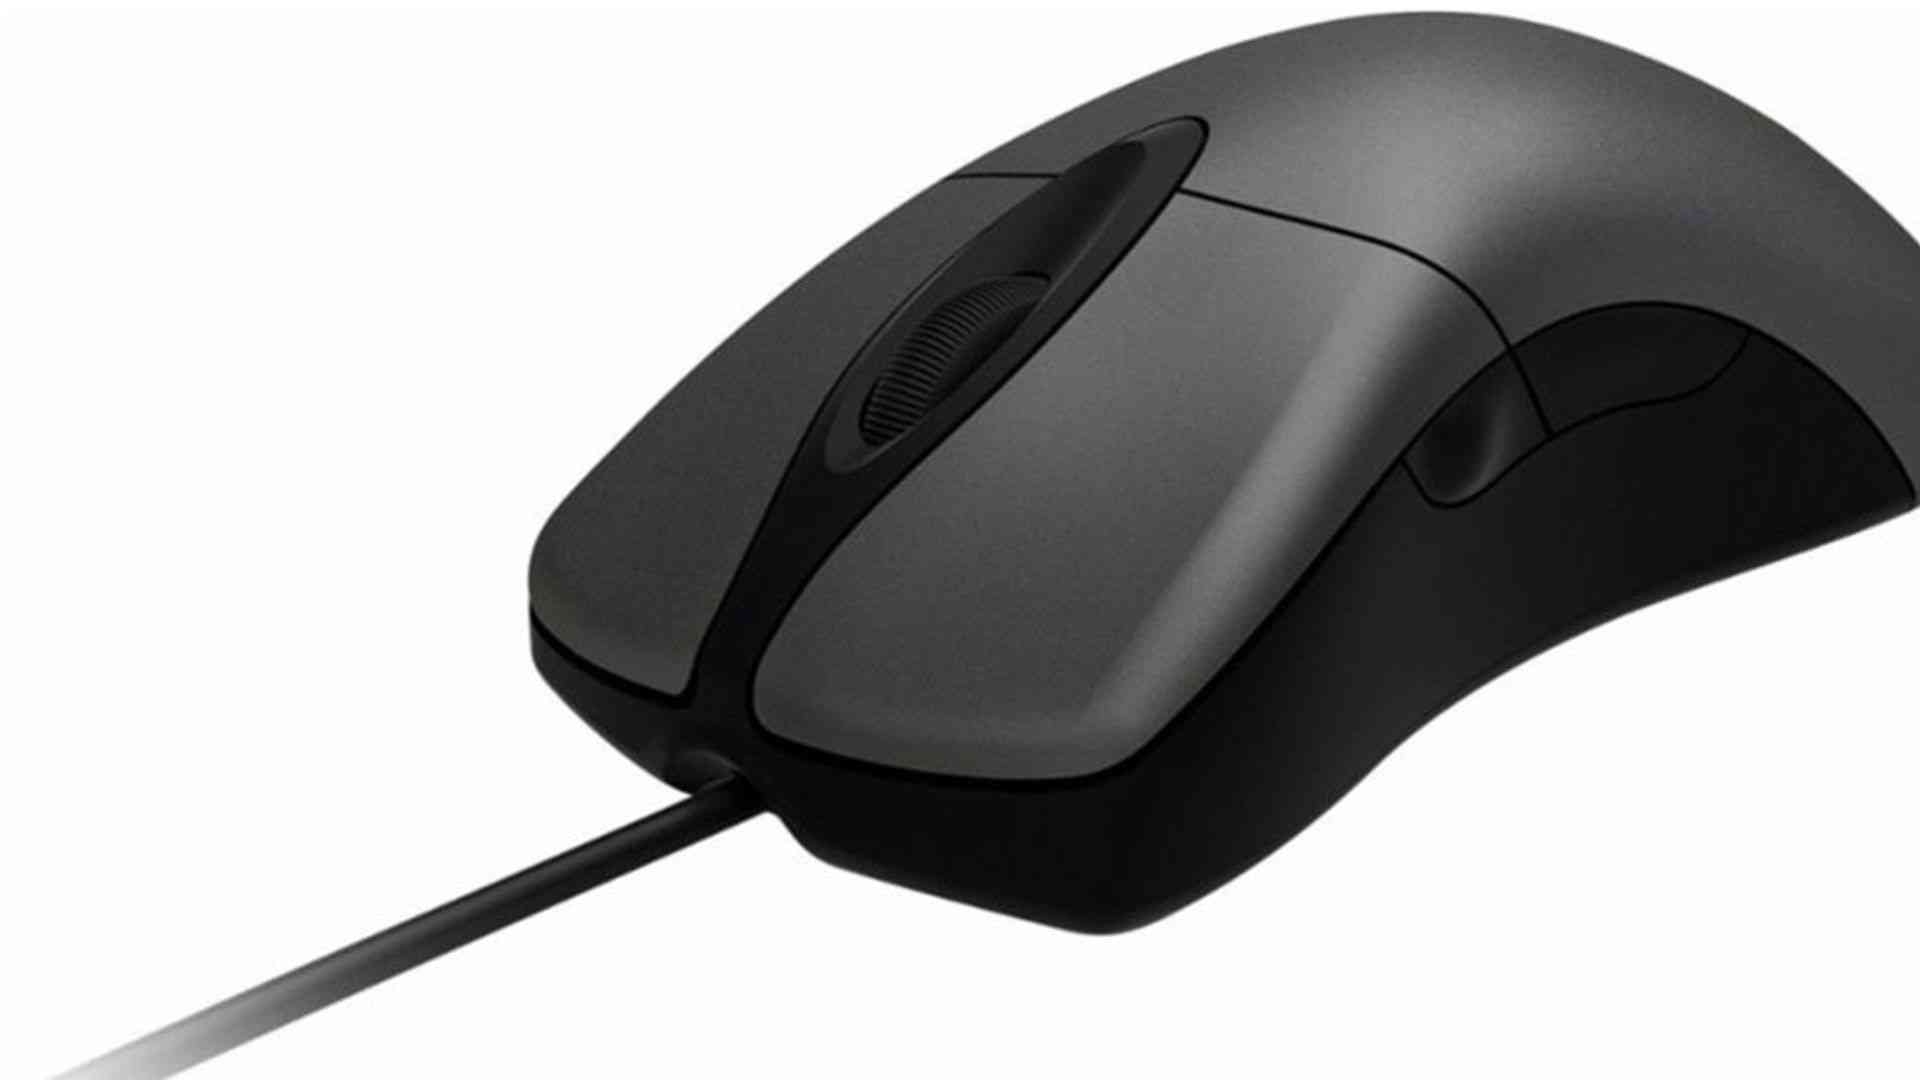 pro intellimouse the new microsoft mouse for videogames 2554 big 1